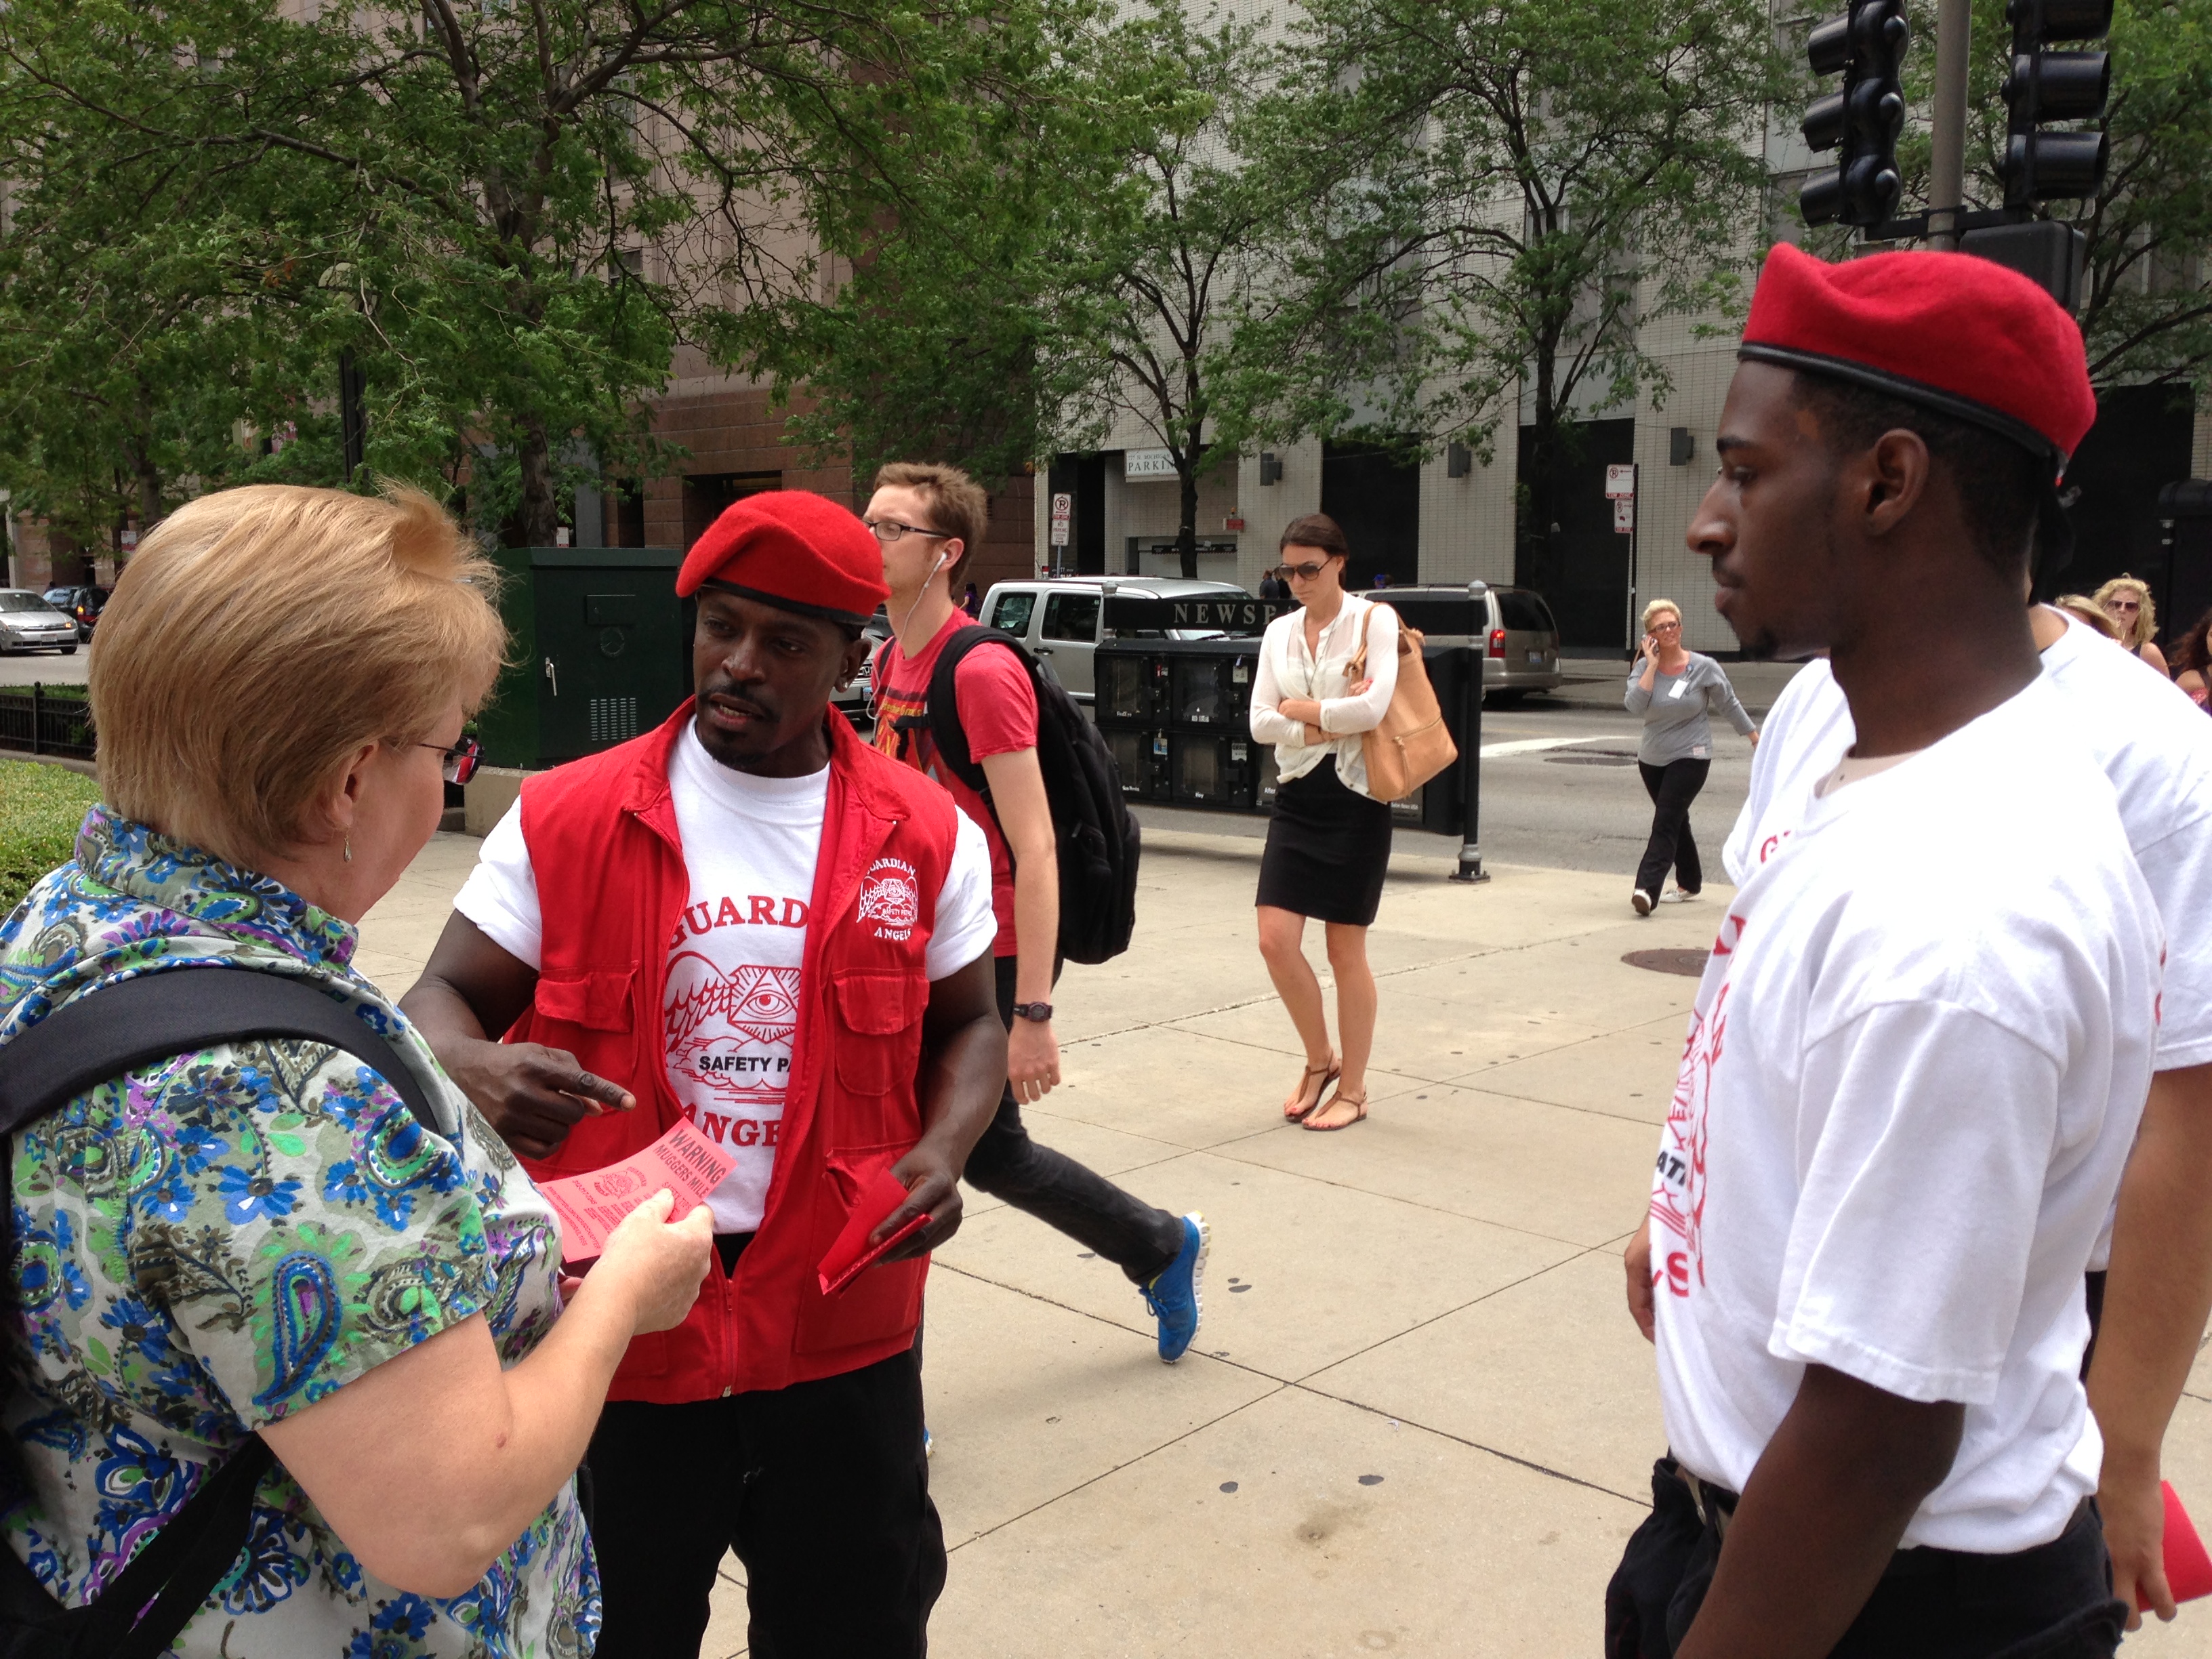 Guardian Angels passing out flyers along Michigan Avenue. (Credit: Steve Miller)